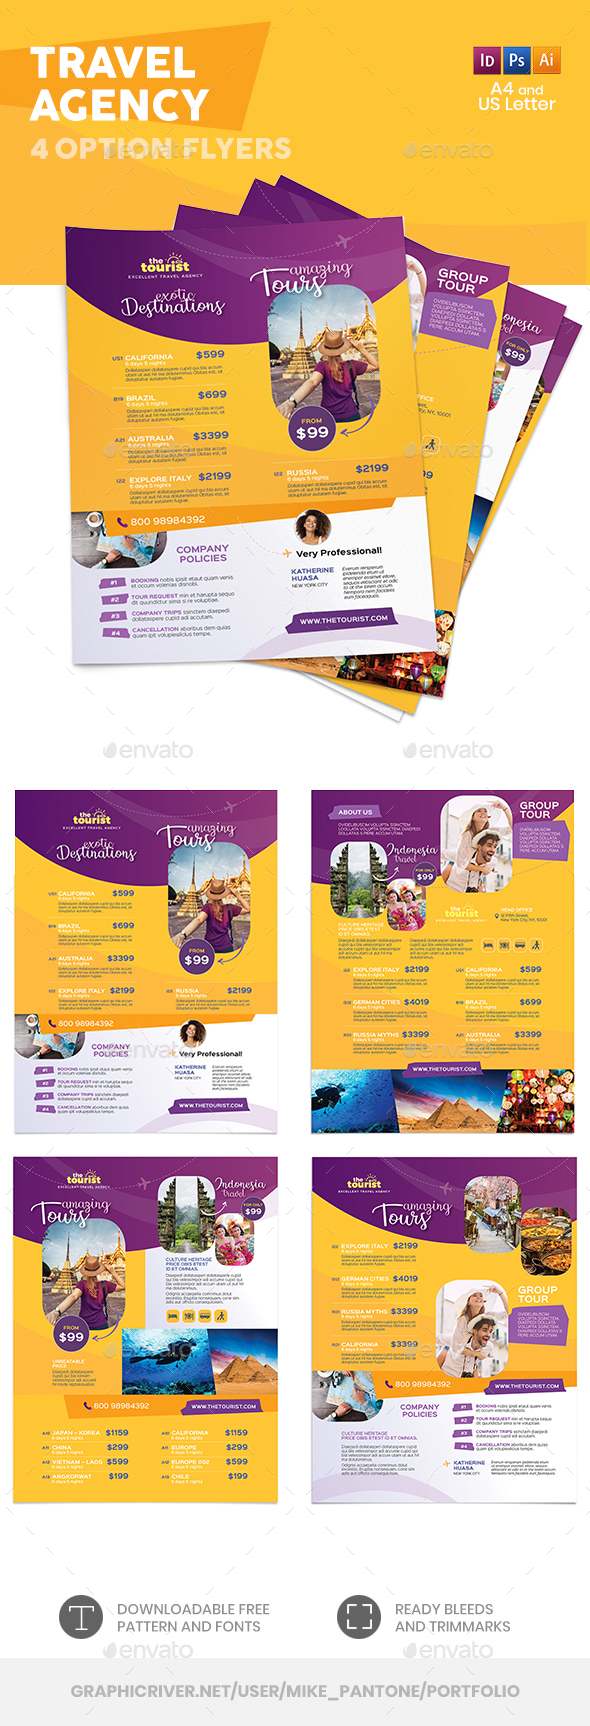 Travel Agency Flyers 4 – 4 Options